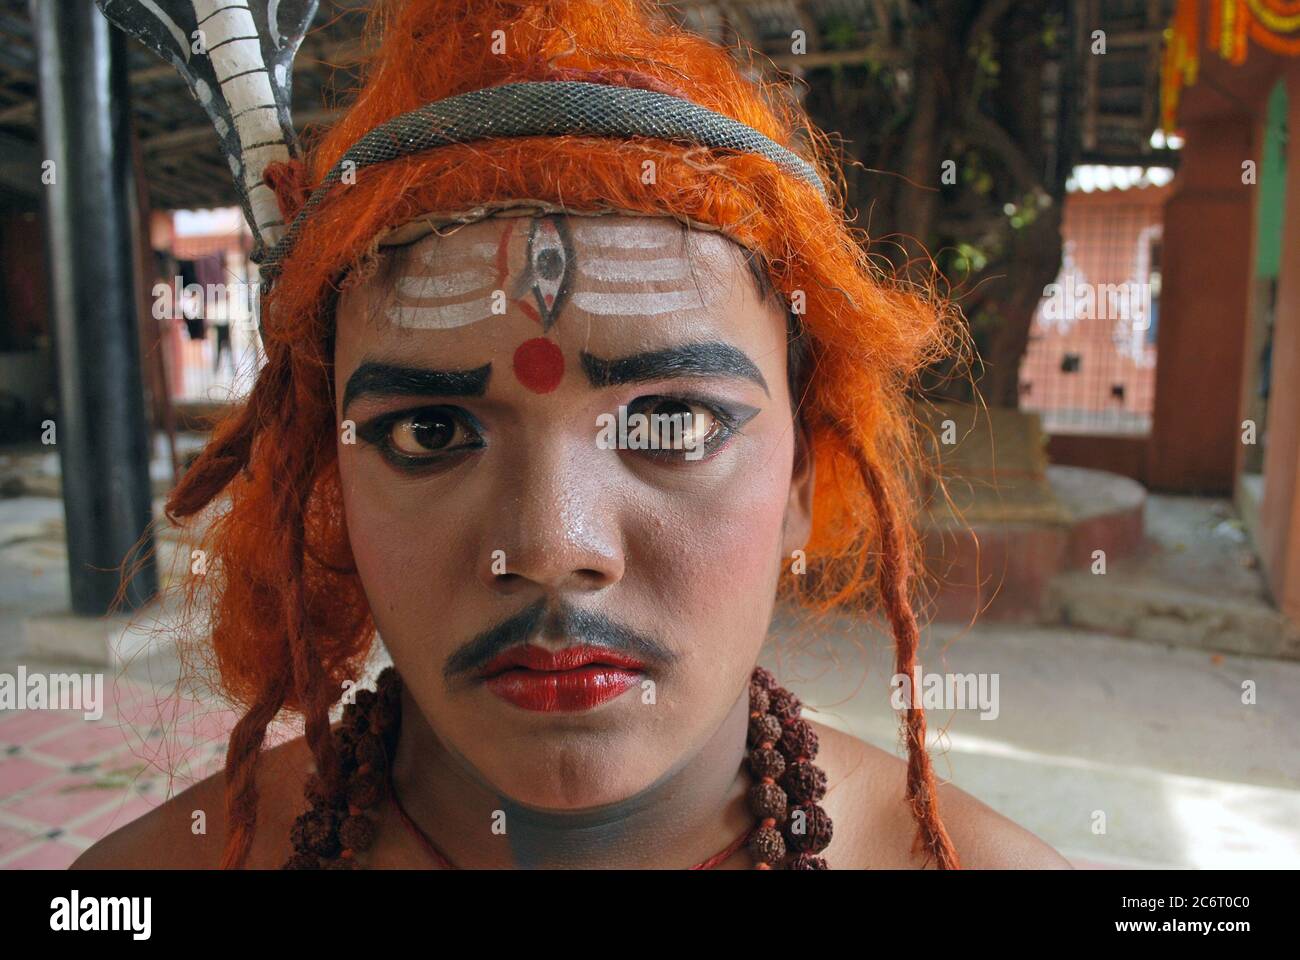 On the evening of Chaitra Sankranti the last day of Bengali calendar resident of Kalighat dress up like Hindu deities popularly known as Sang. Stock Photo